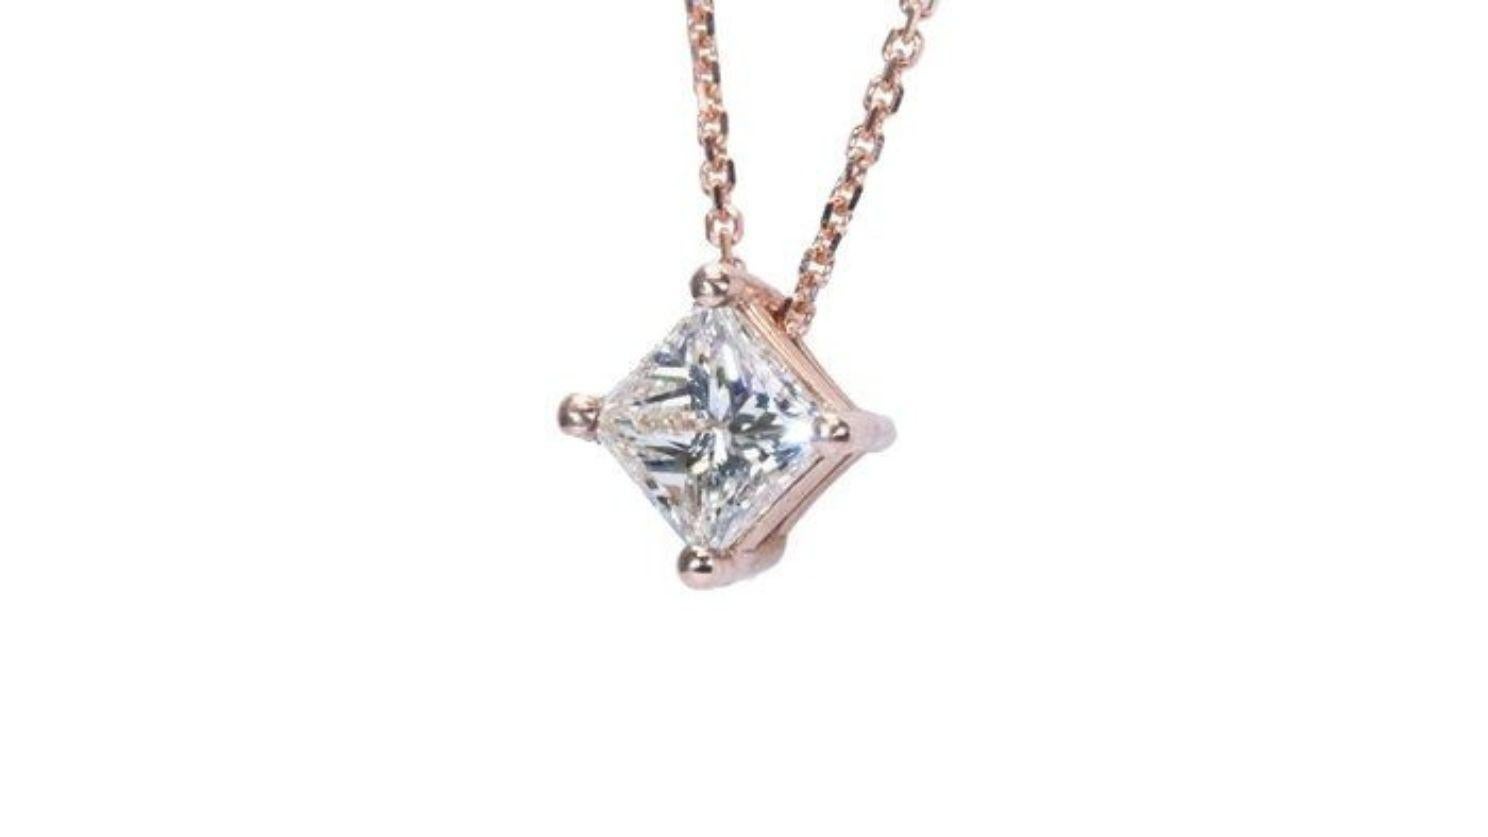 Exquisite 0.91 Carat Princess Cut Diamond Necklace in 18K Pink Gold In New Condition For Sale In רמת גן, IL